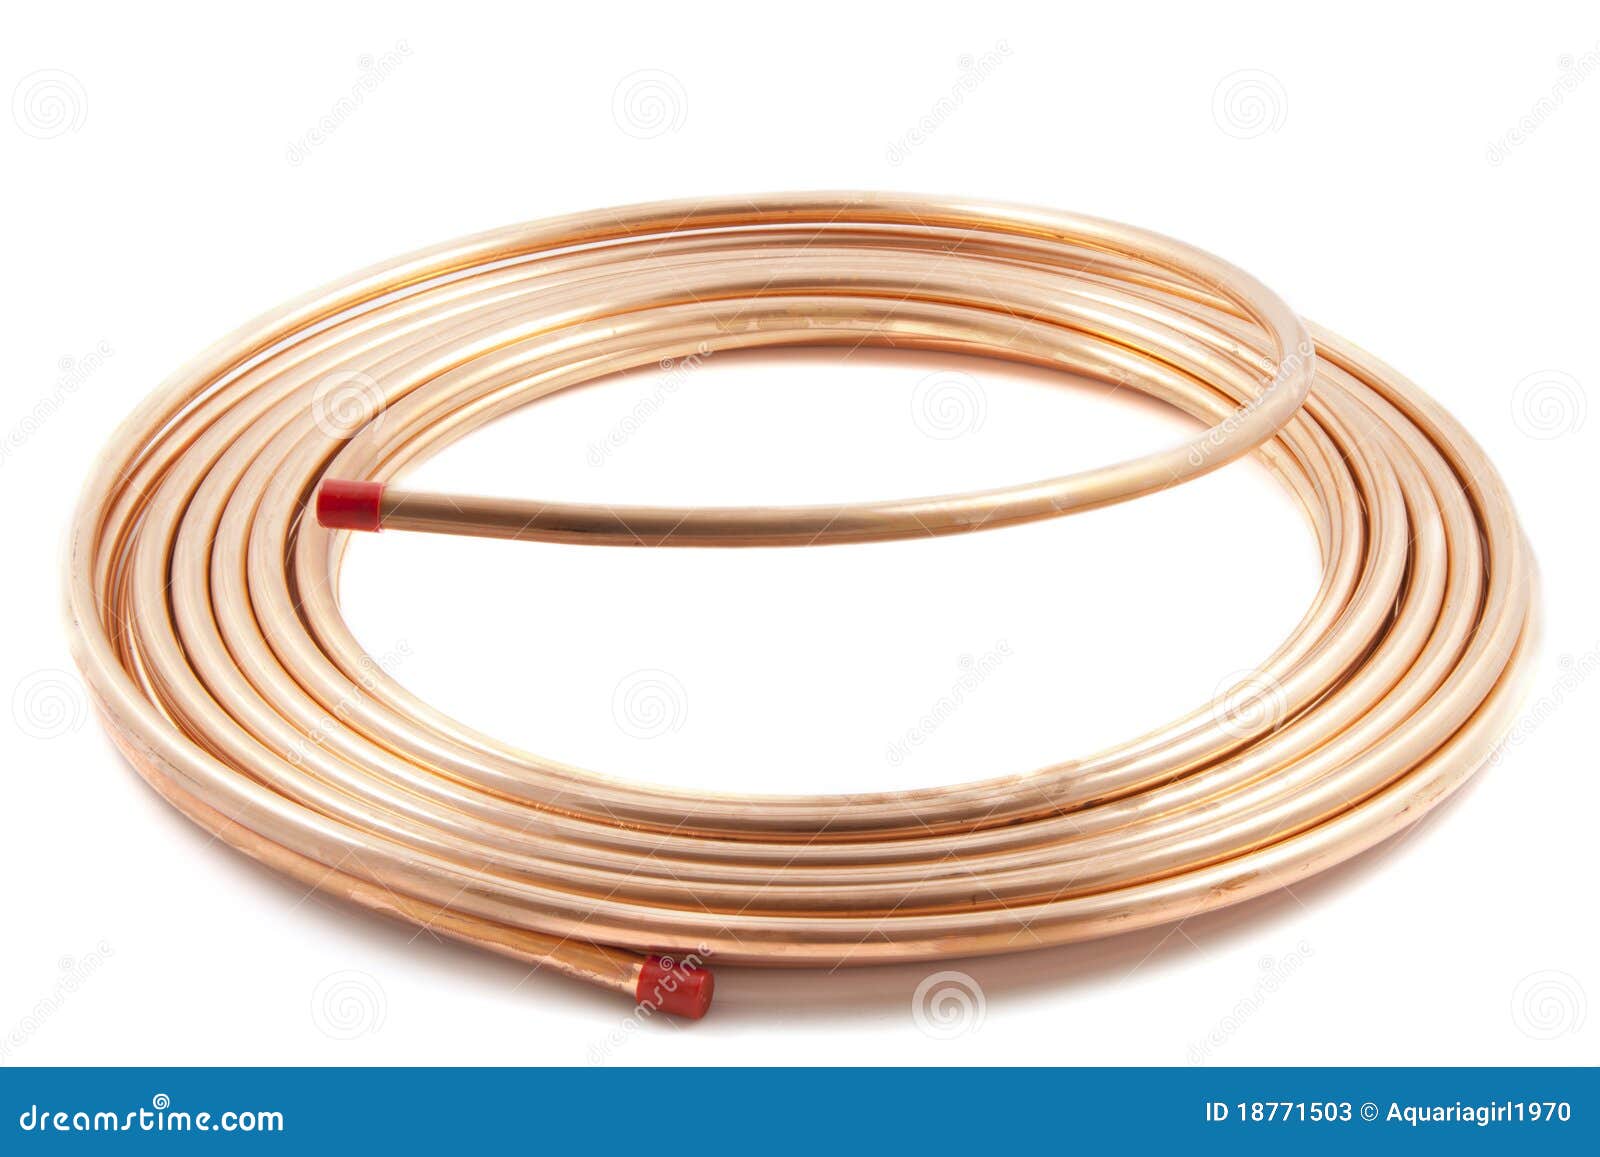 26+ Thousand Copper Tube Royalty-Free Images, Stock Photos